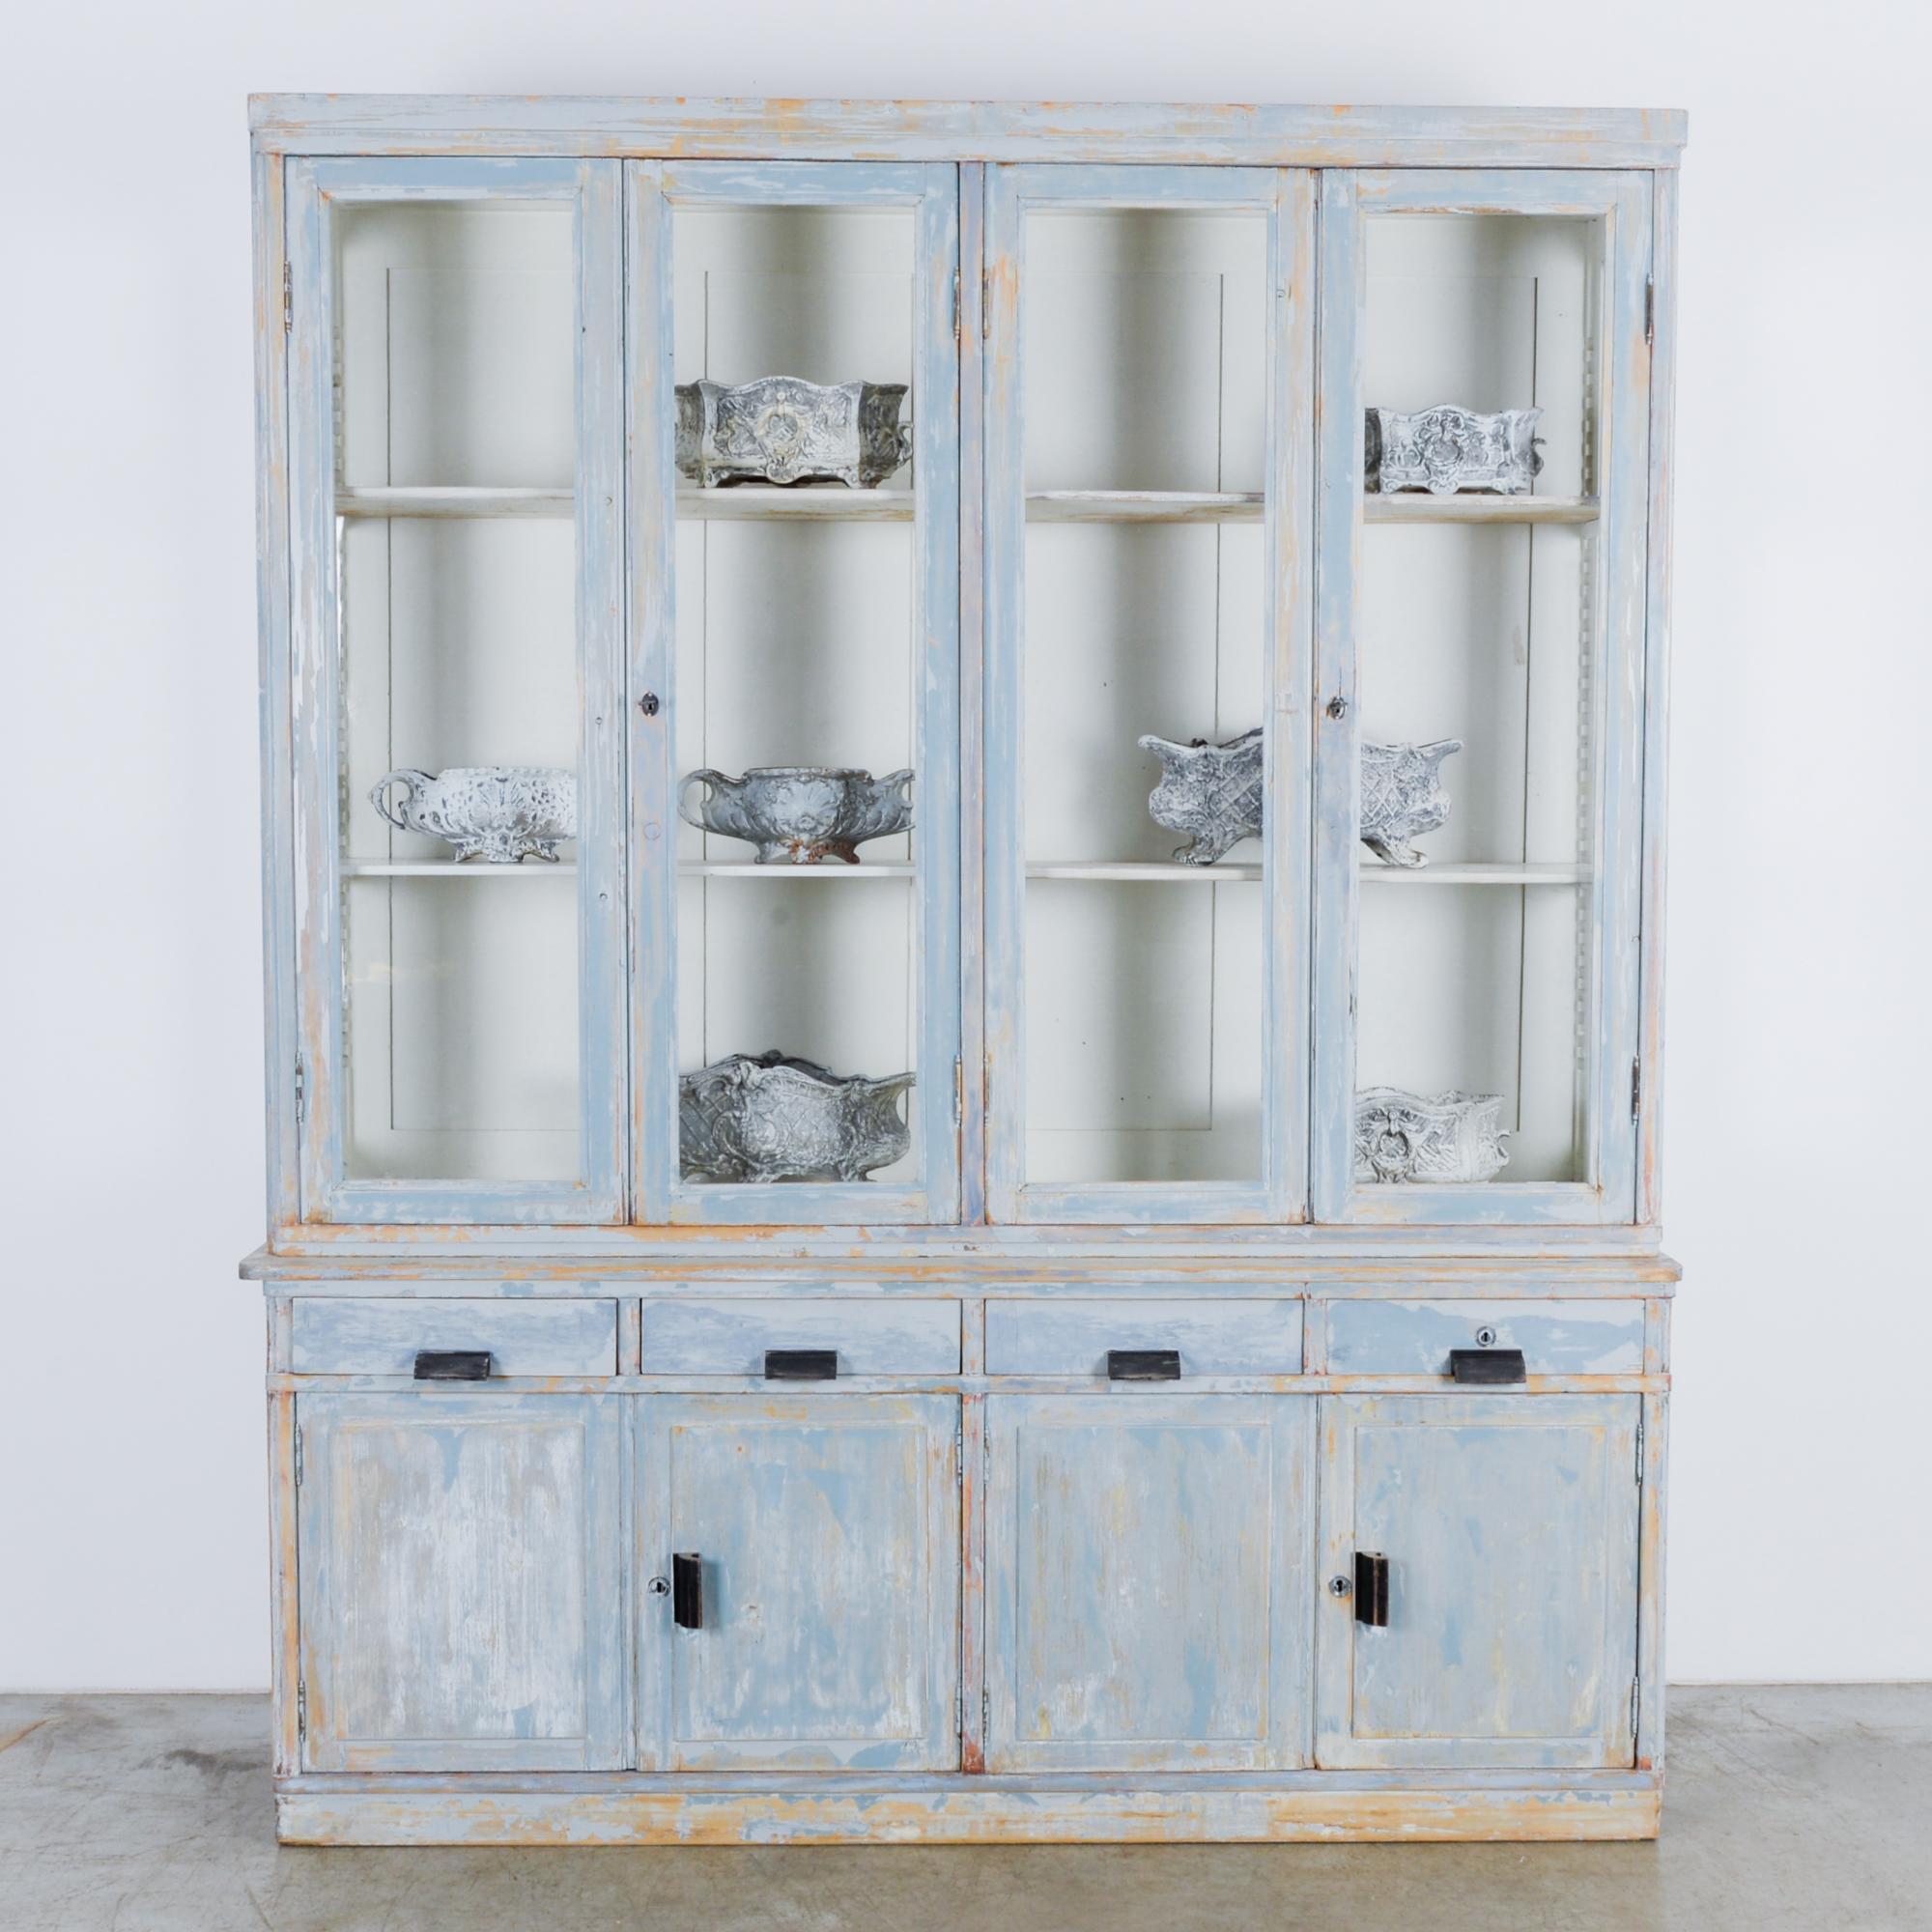 A wood patinated vitrine produced in France, circa 1920. This elegantly aged cabinet features four glass panel doors, four drawers, and four cabinet doors below. At eight feet tall and over six feet wide, this towering vitrine commands the room with